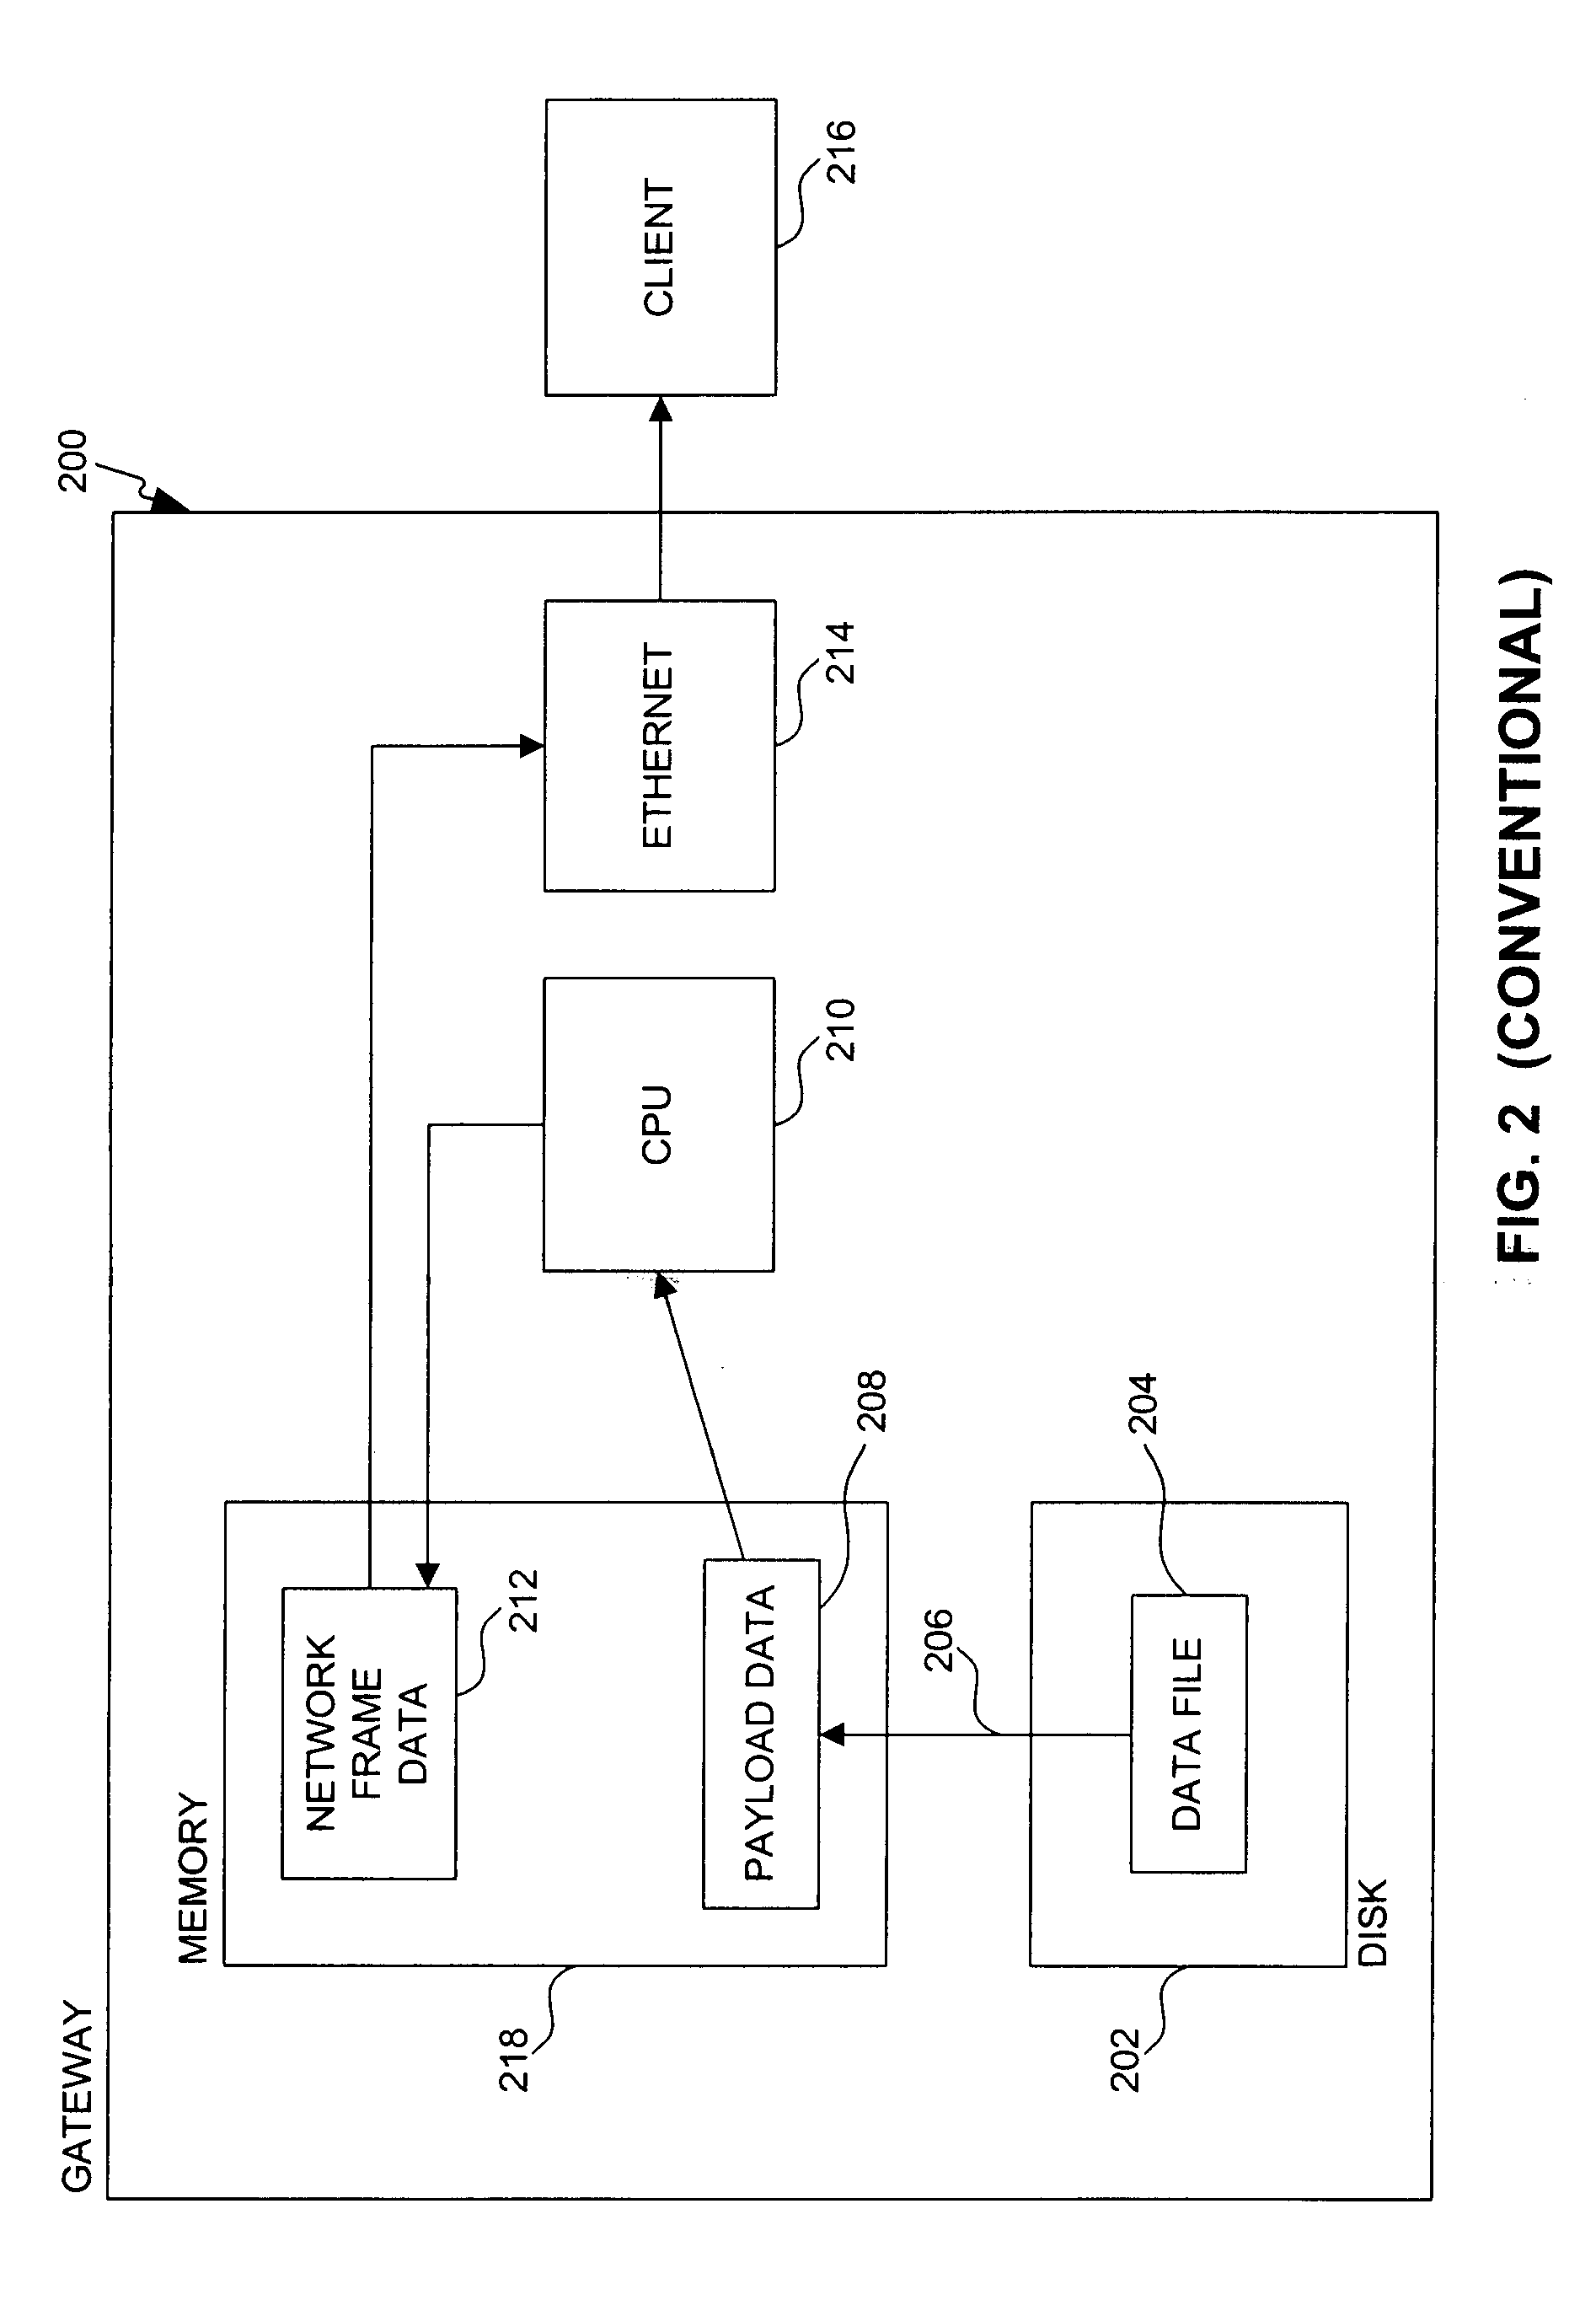 System and method for implementing video streaming over IP networks